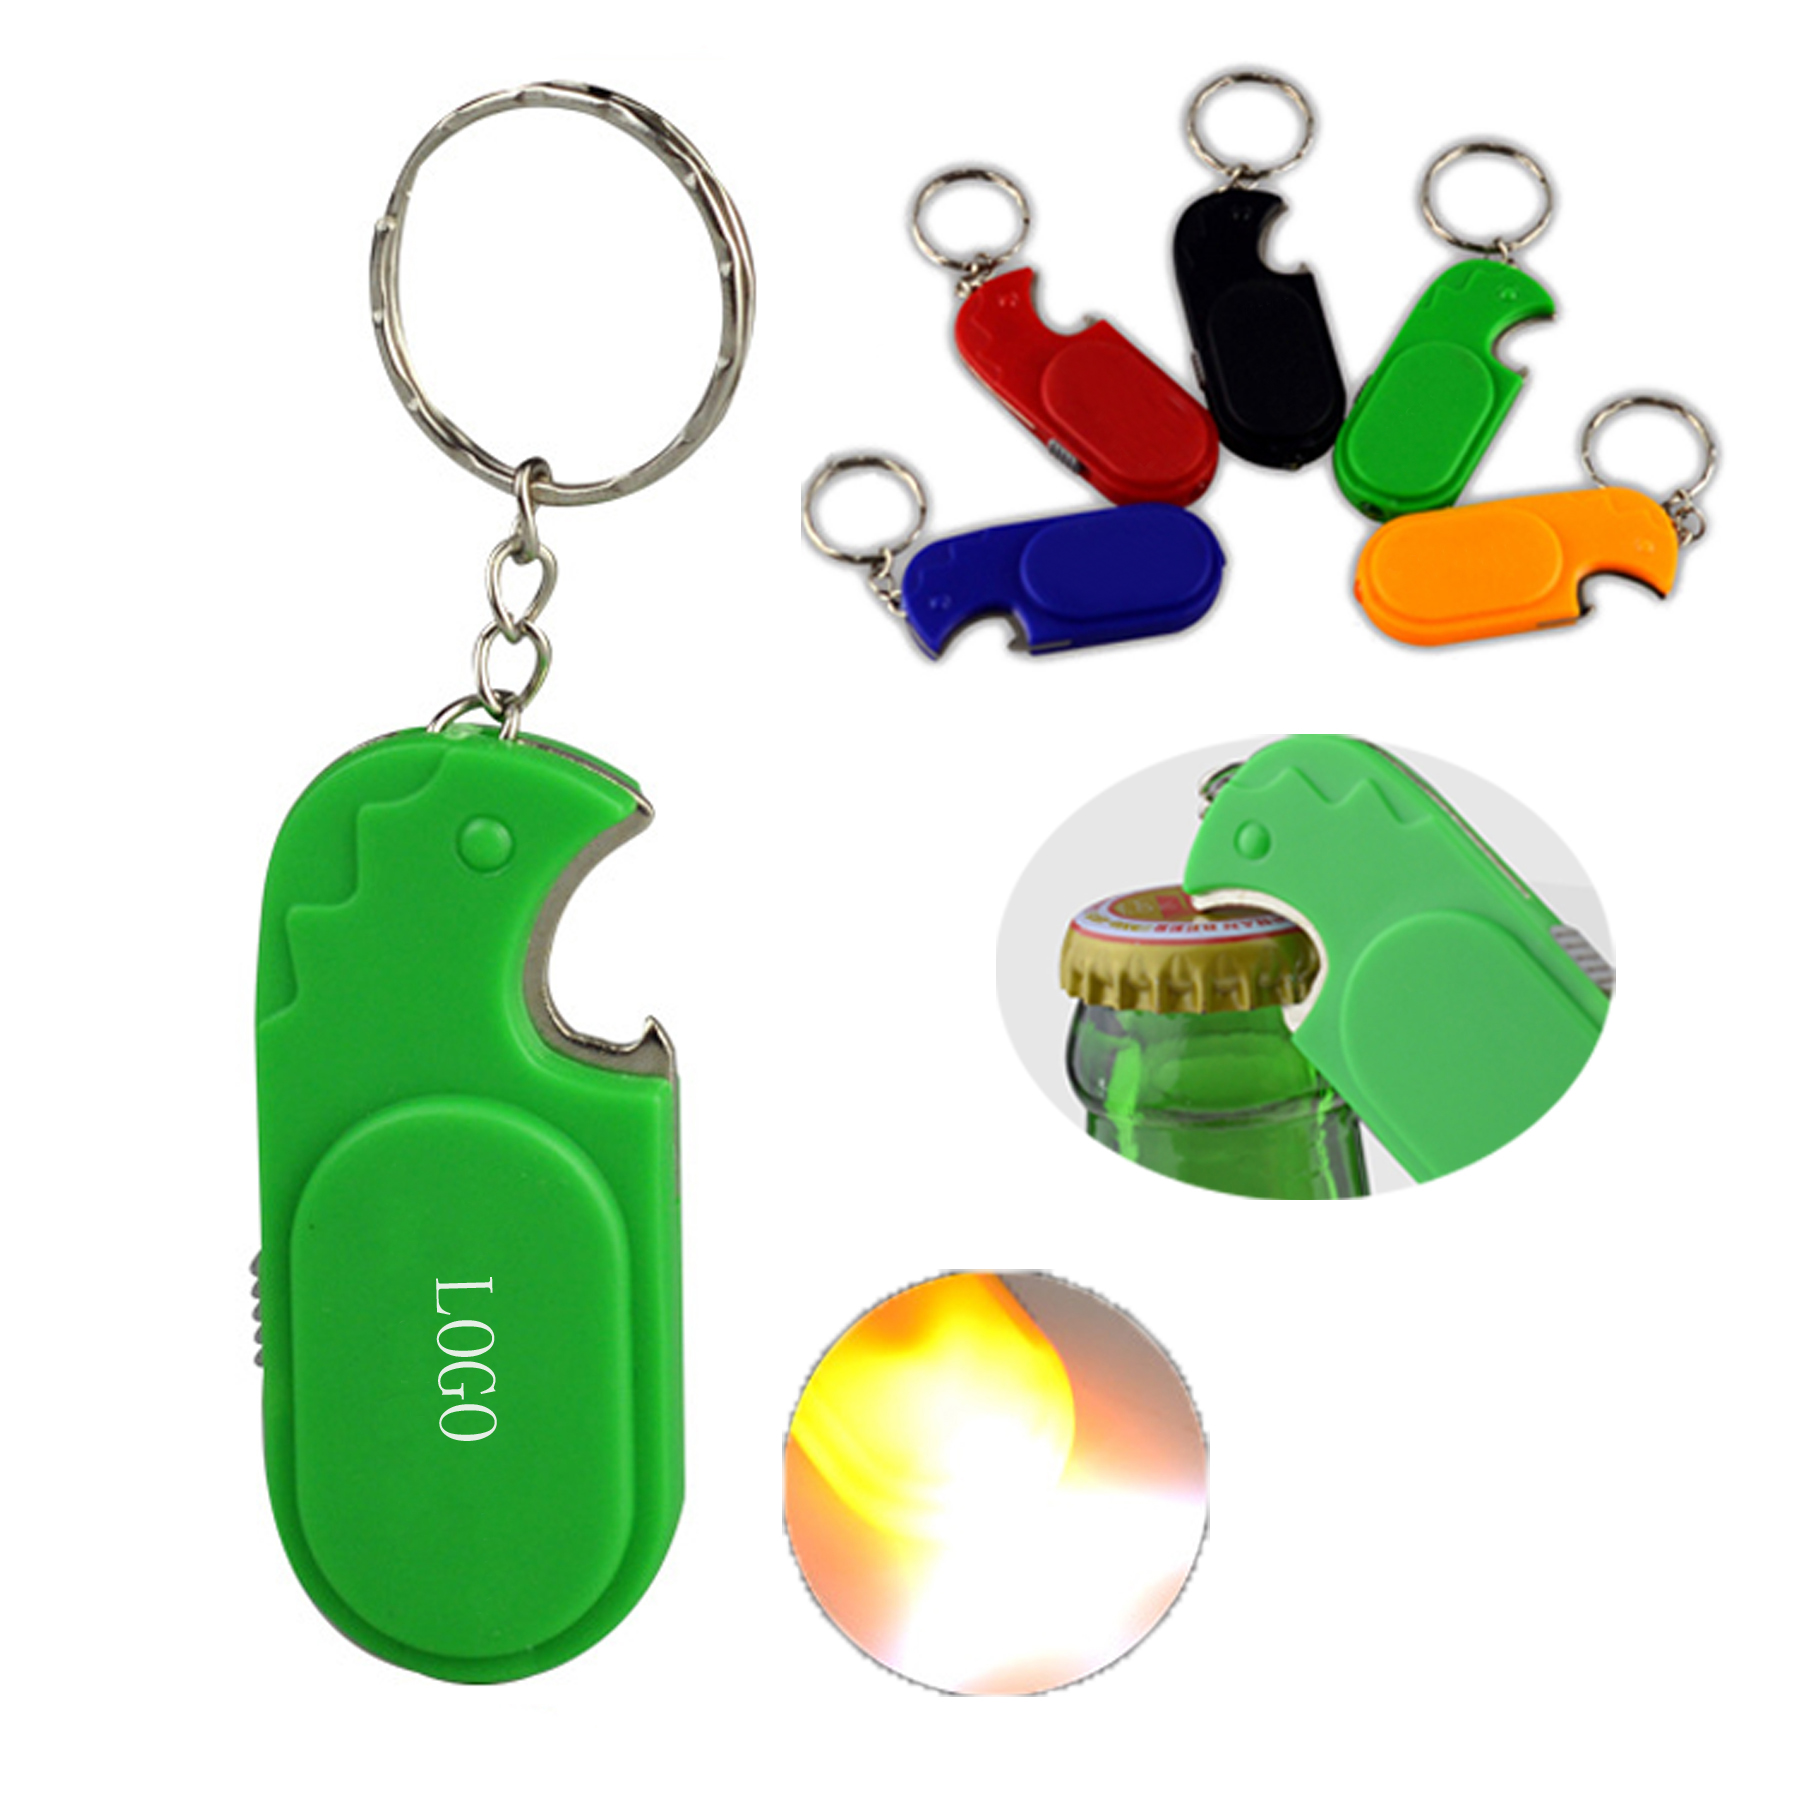 3-In-1 Keyring with Bottle Opener and LED light